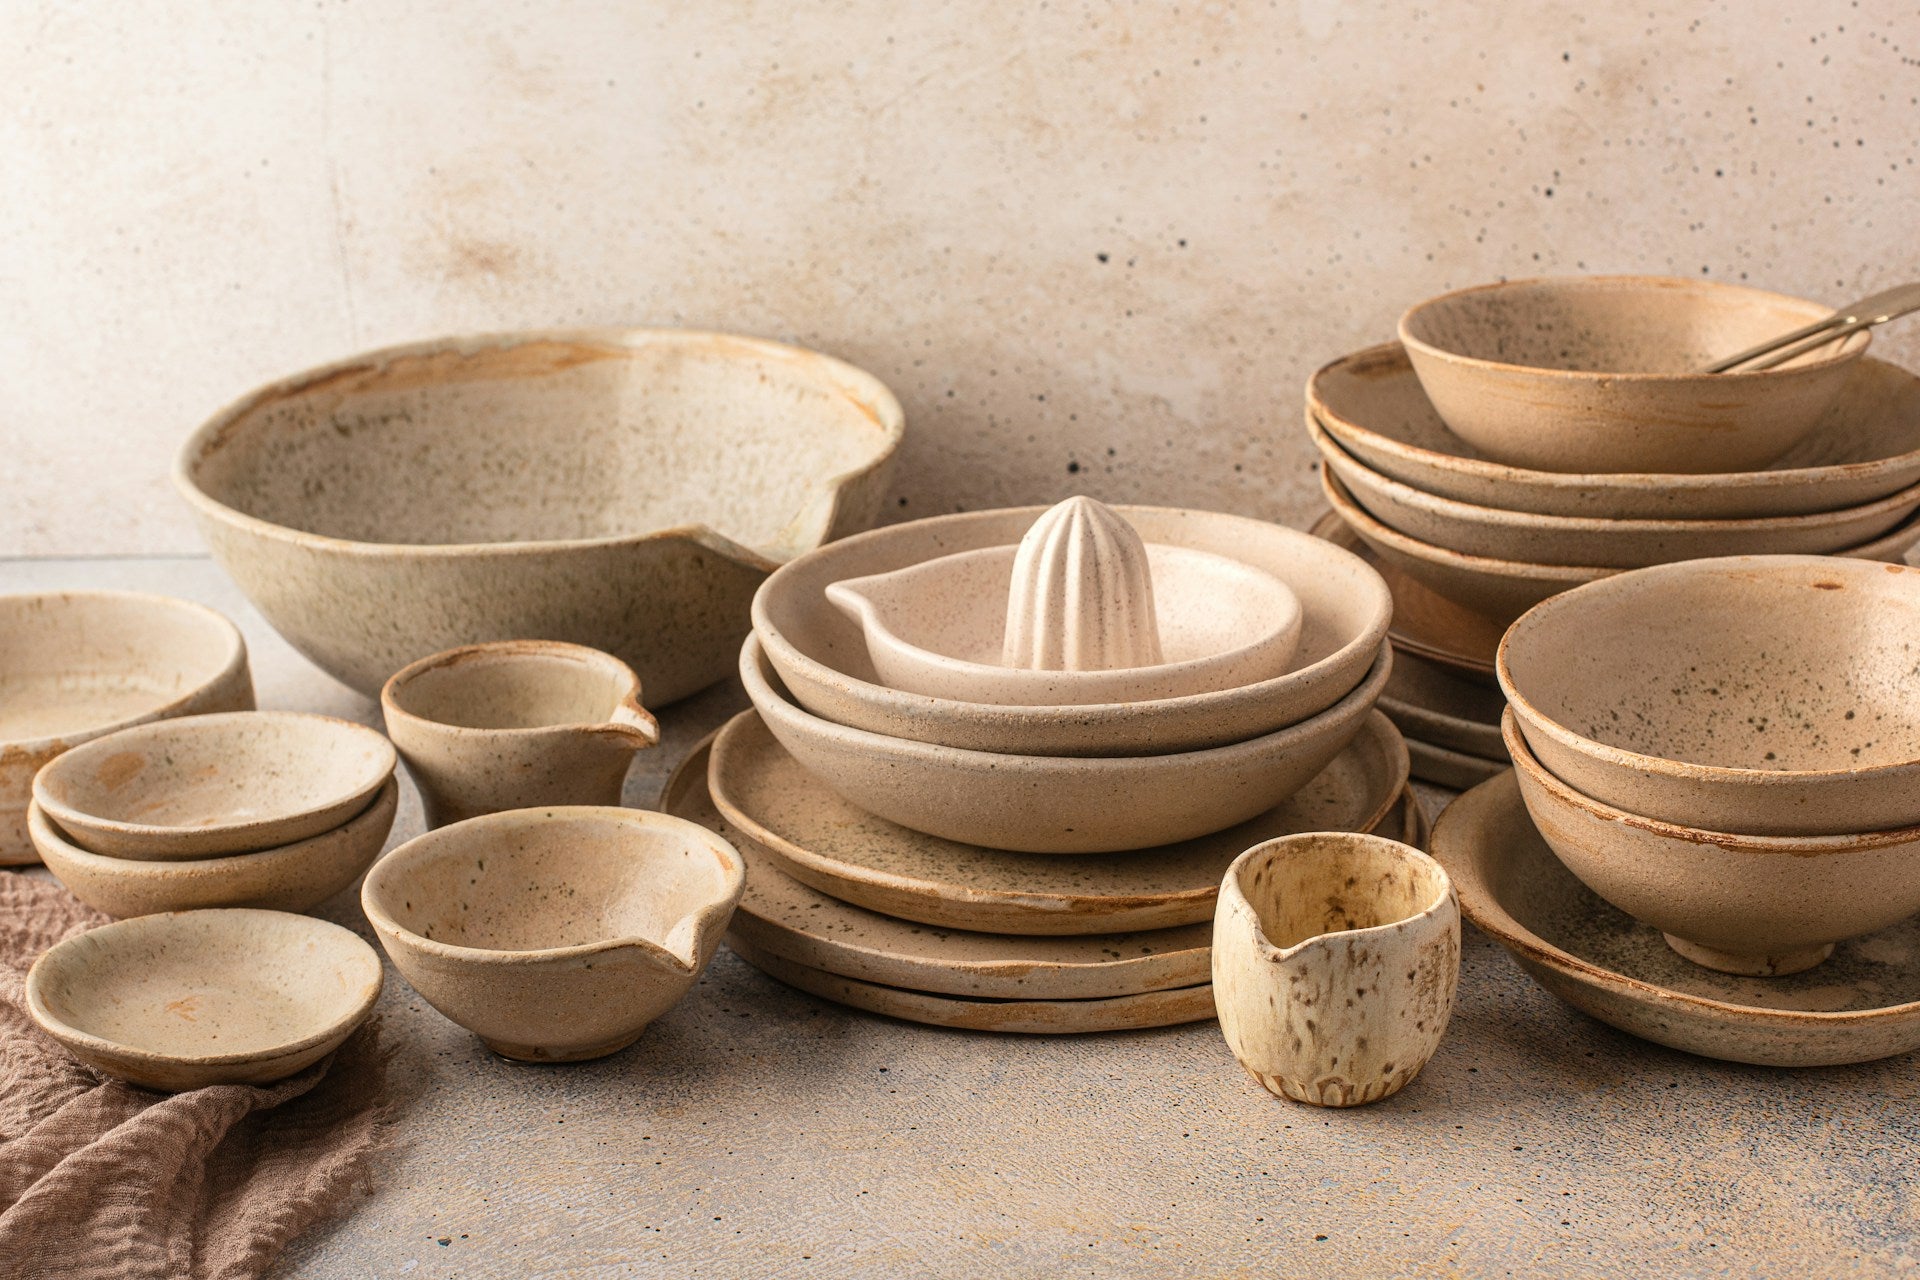 An assortment of bowls and dishes sitting on a table.